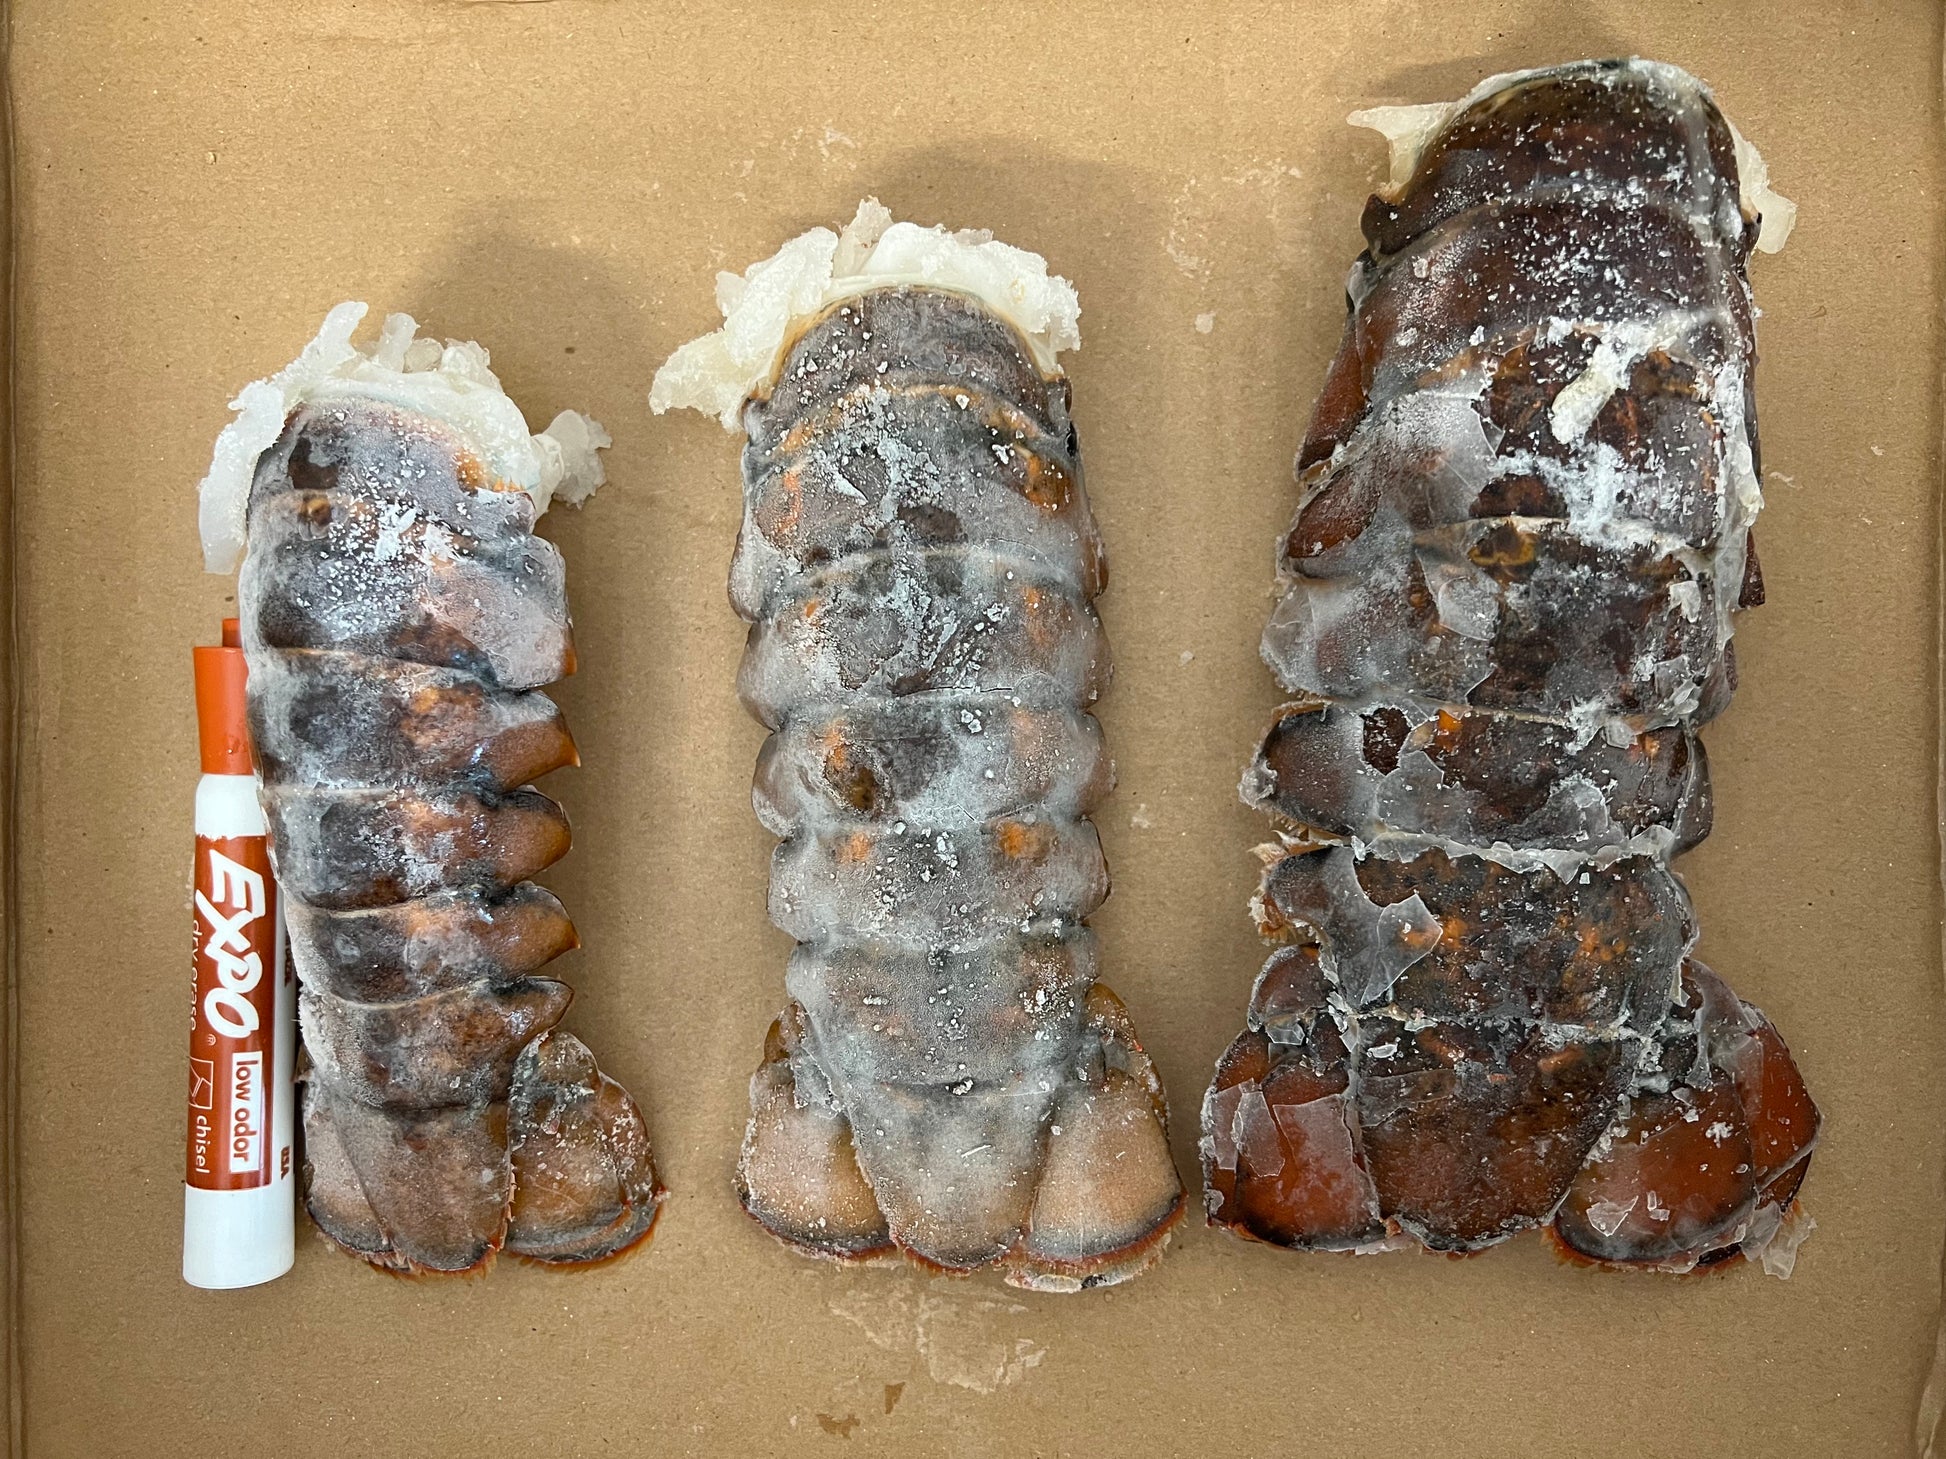 WILD 7-8 oz. Canadian Lobster tails